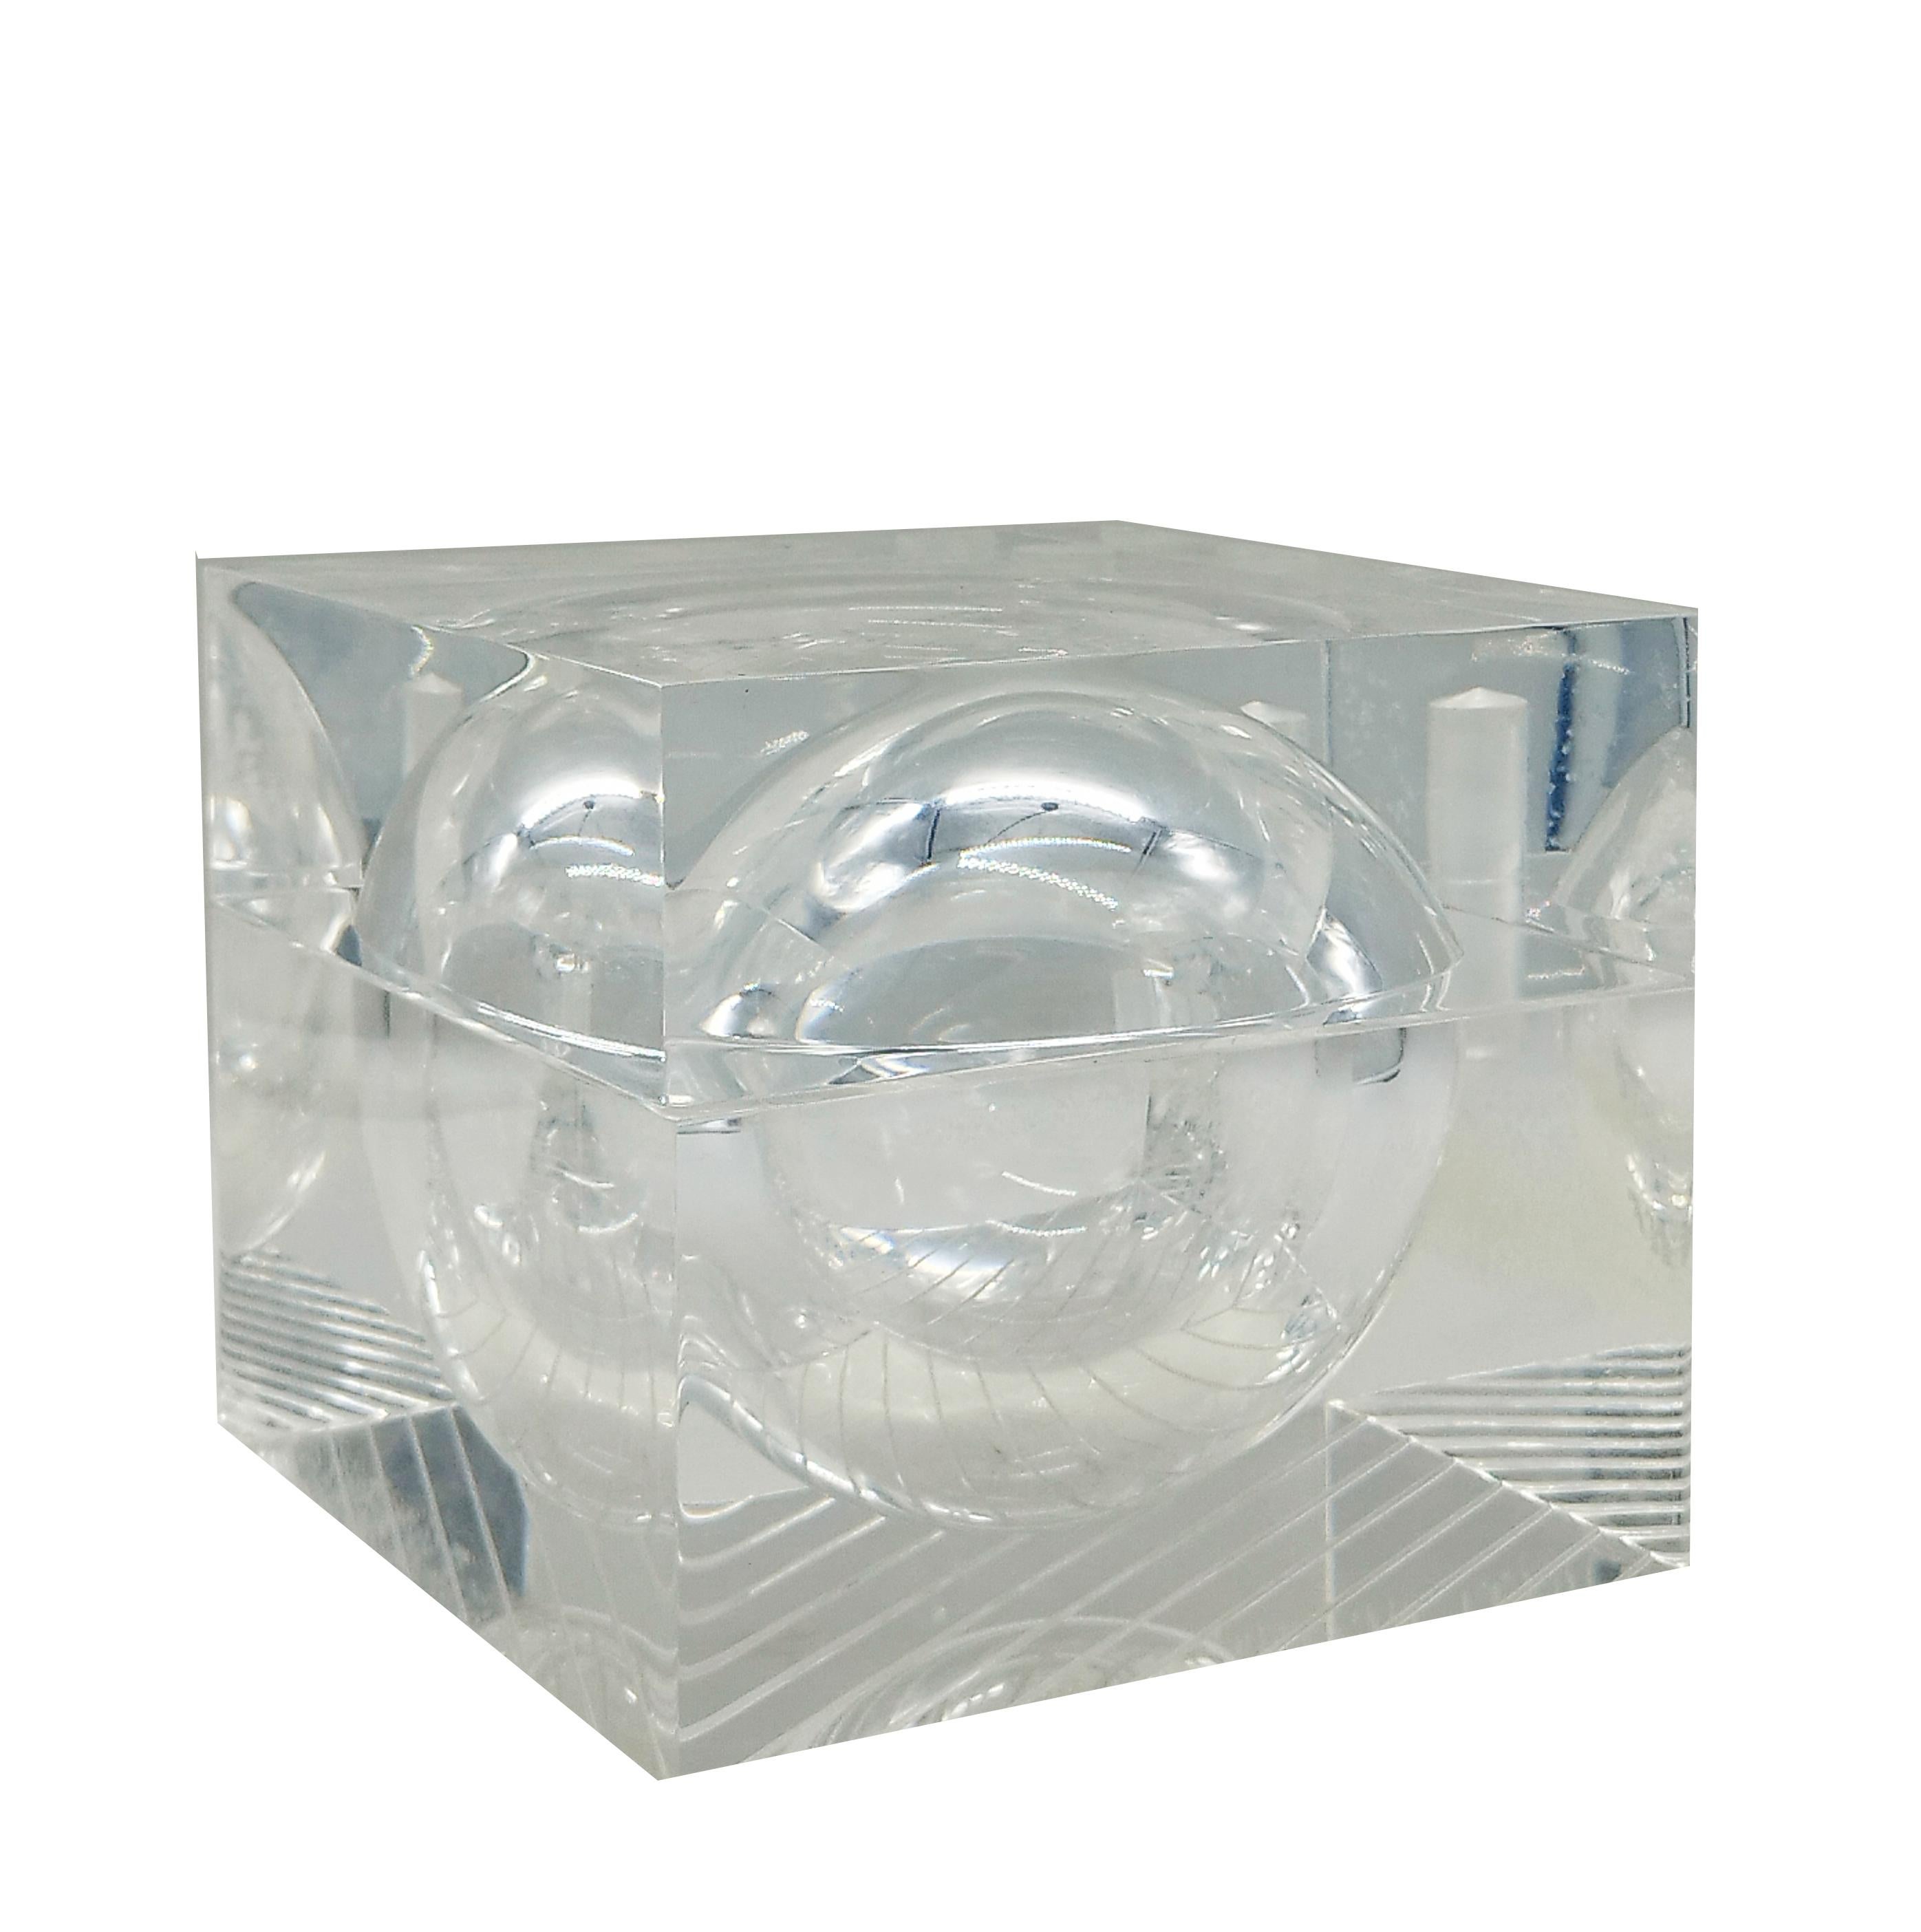 Cube made of transparent glossy plexiglass by Alessandro Albrizzi in the 1970s.  The cube is an elegant decorative element from the 1970s and can serve several functions. It can be placed in a desk as a decorative element and as an object or cigar